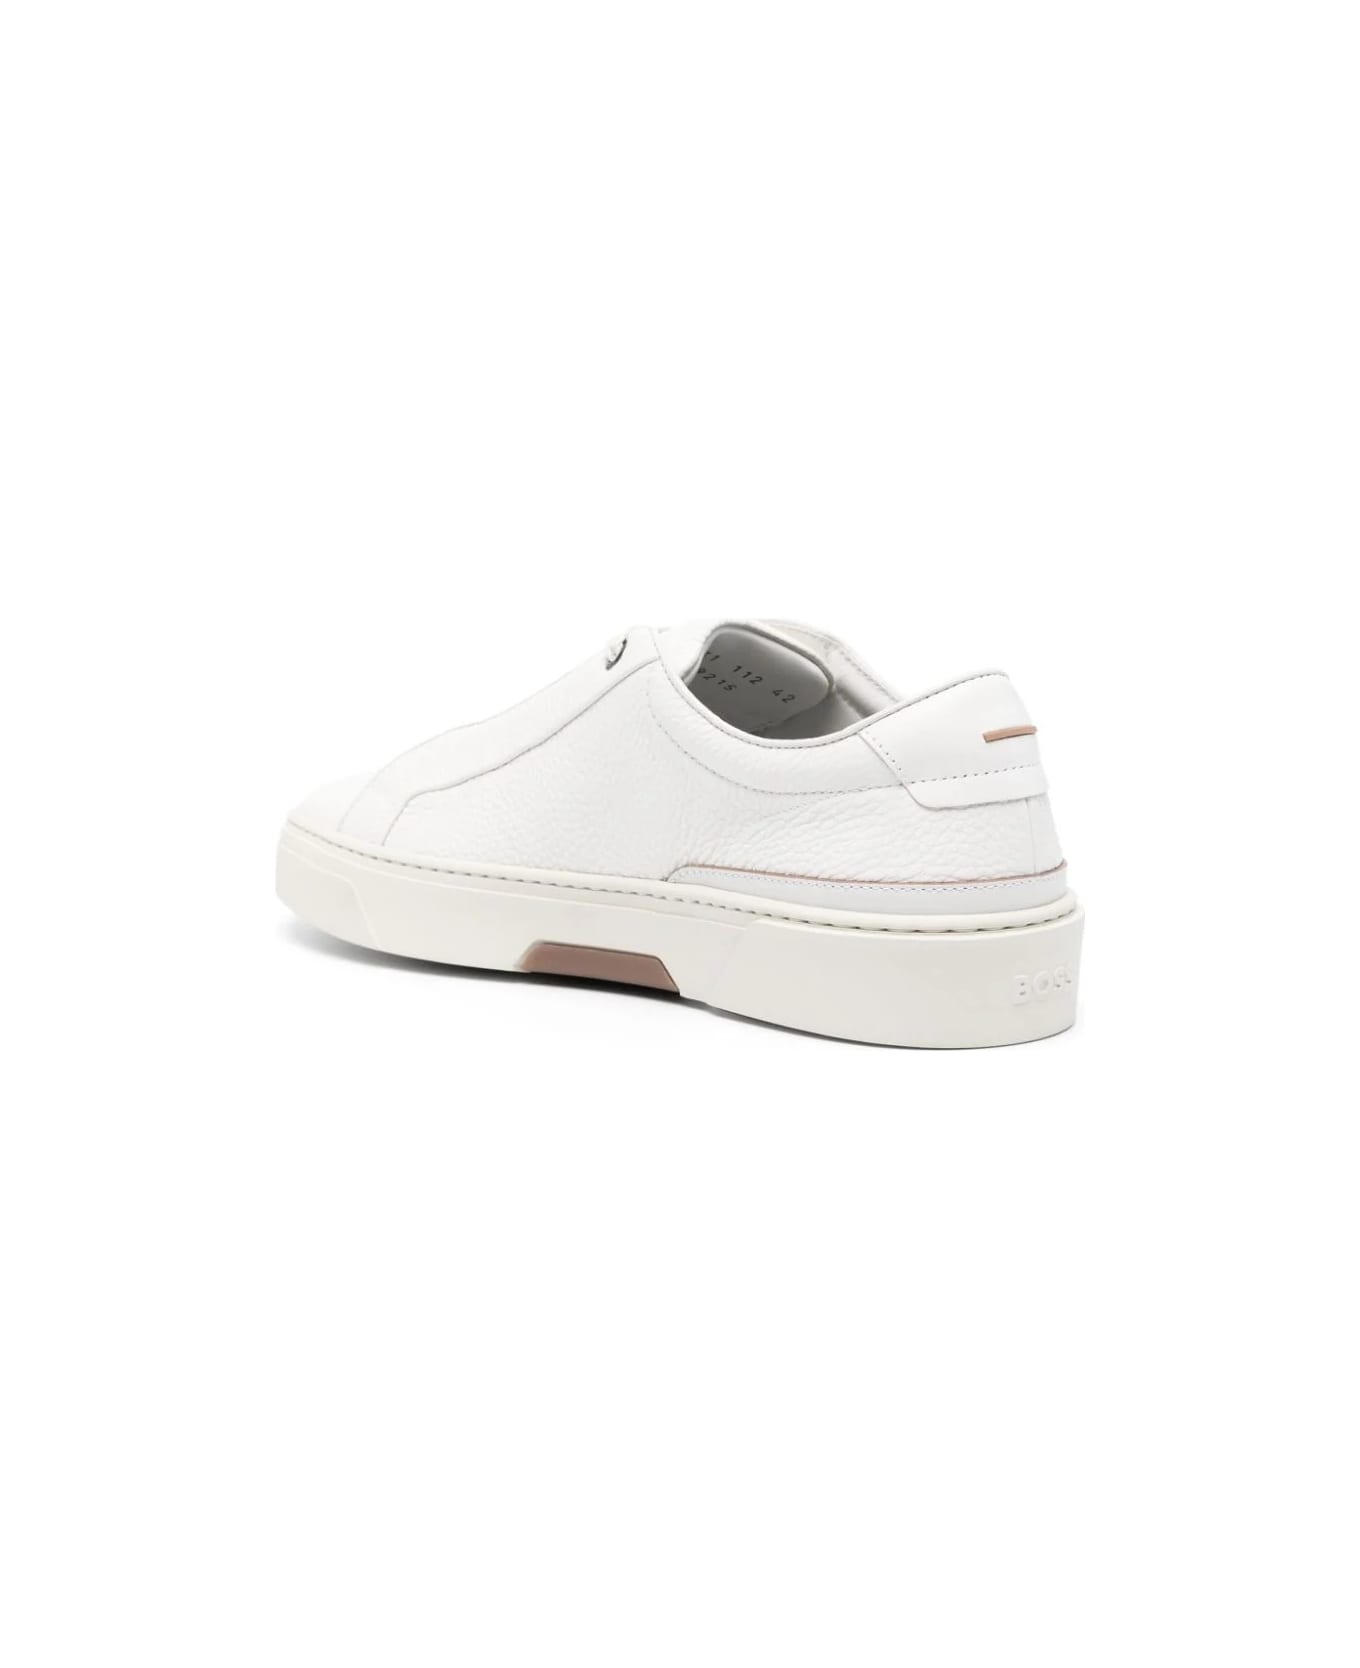 Hugo Boss White Grained Leather Sneakers With Logo Tag On Laces - White